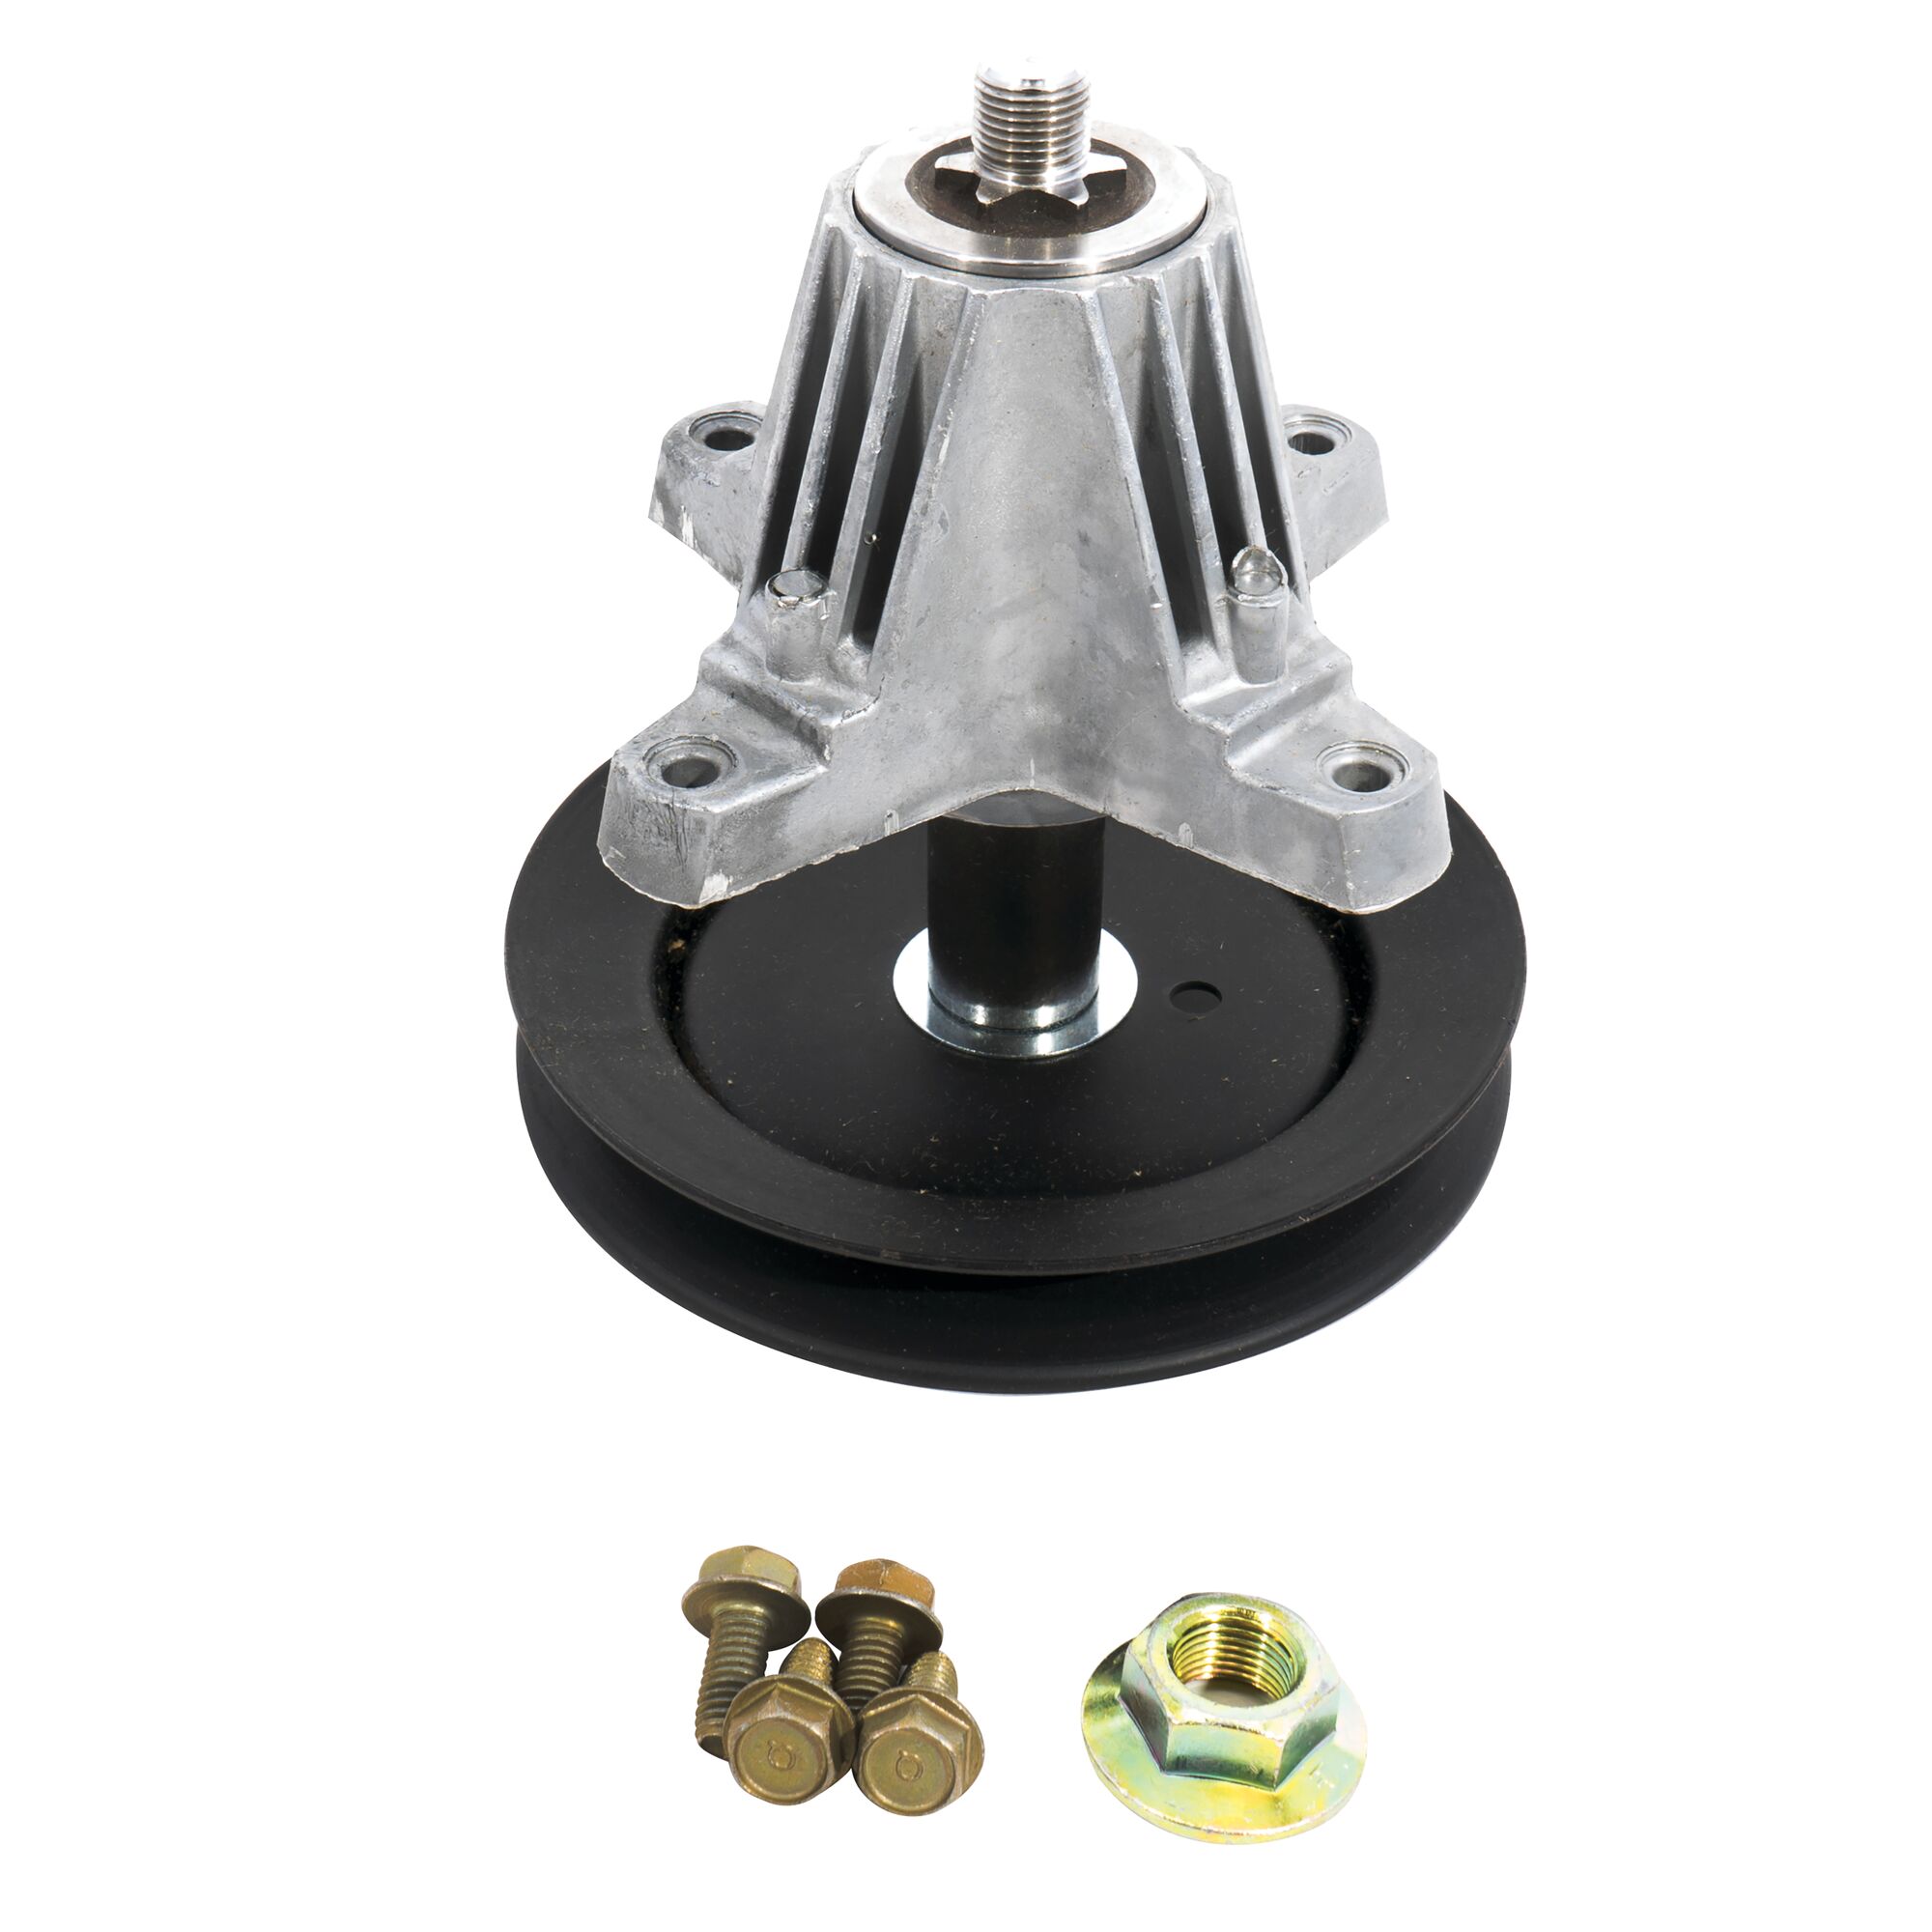 Maintenance Free Spindle Assembly With Hardware.